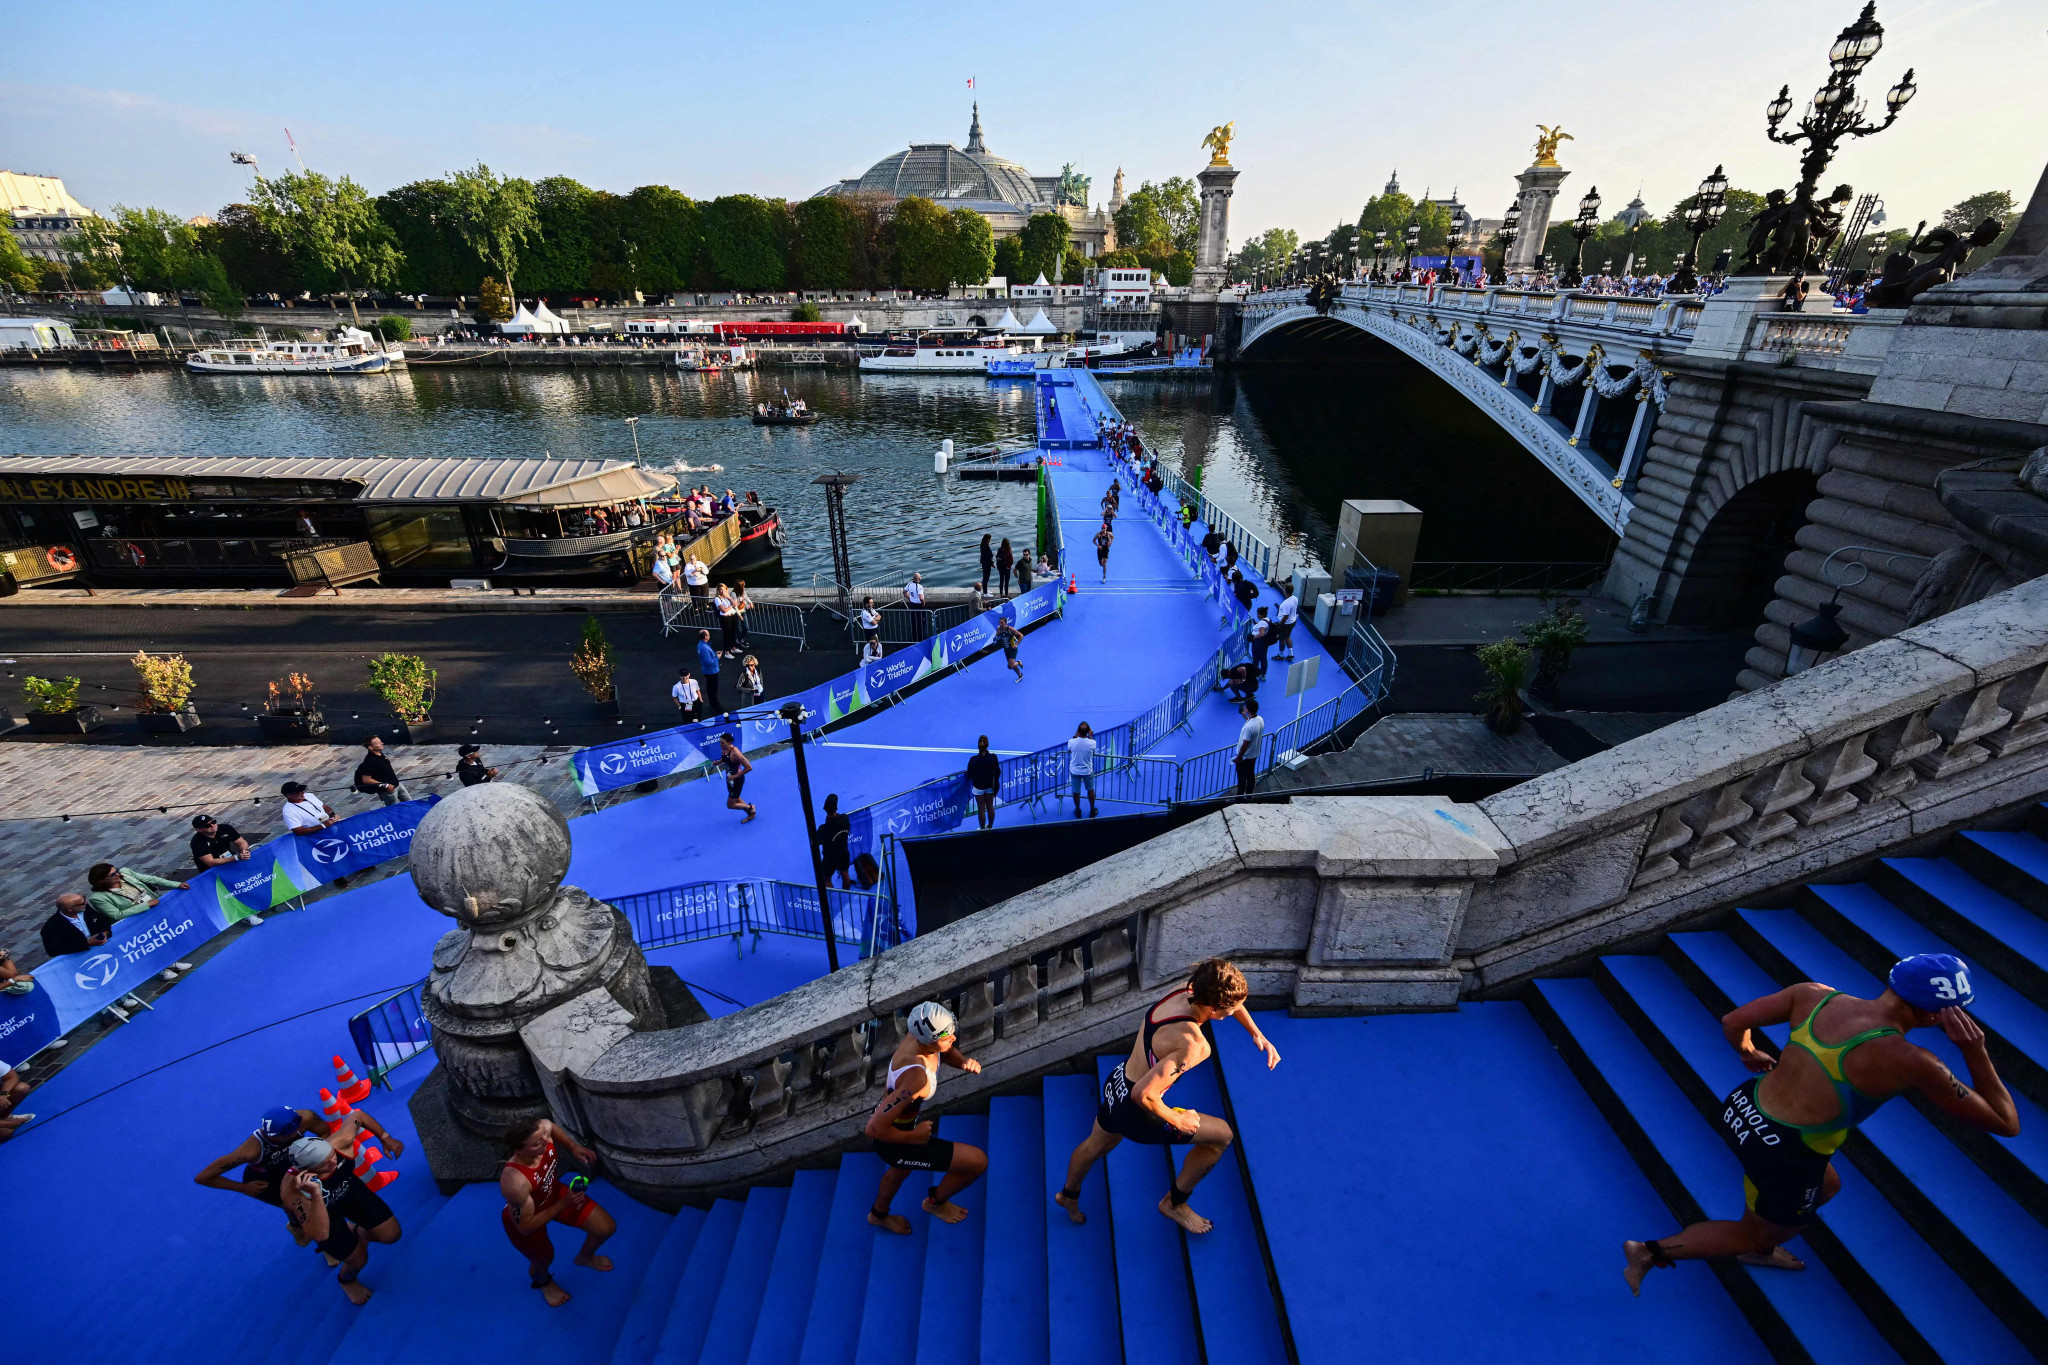 The Seine was used for the men's and women's competitions at the Paris 2024 triathlon test event, but not for the mixed relay or Para triathlon competitions ©Getty Images